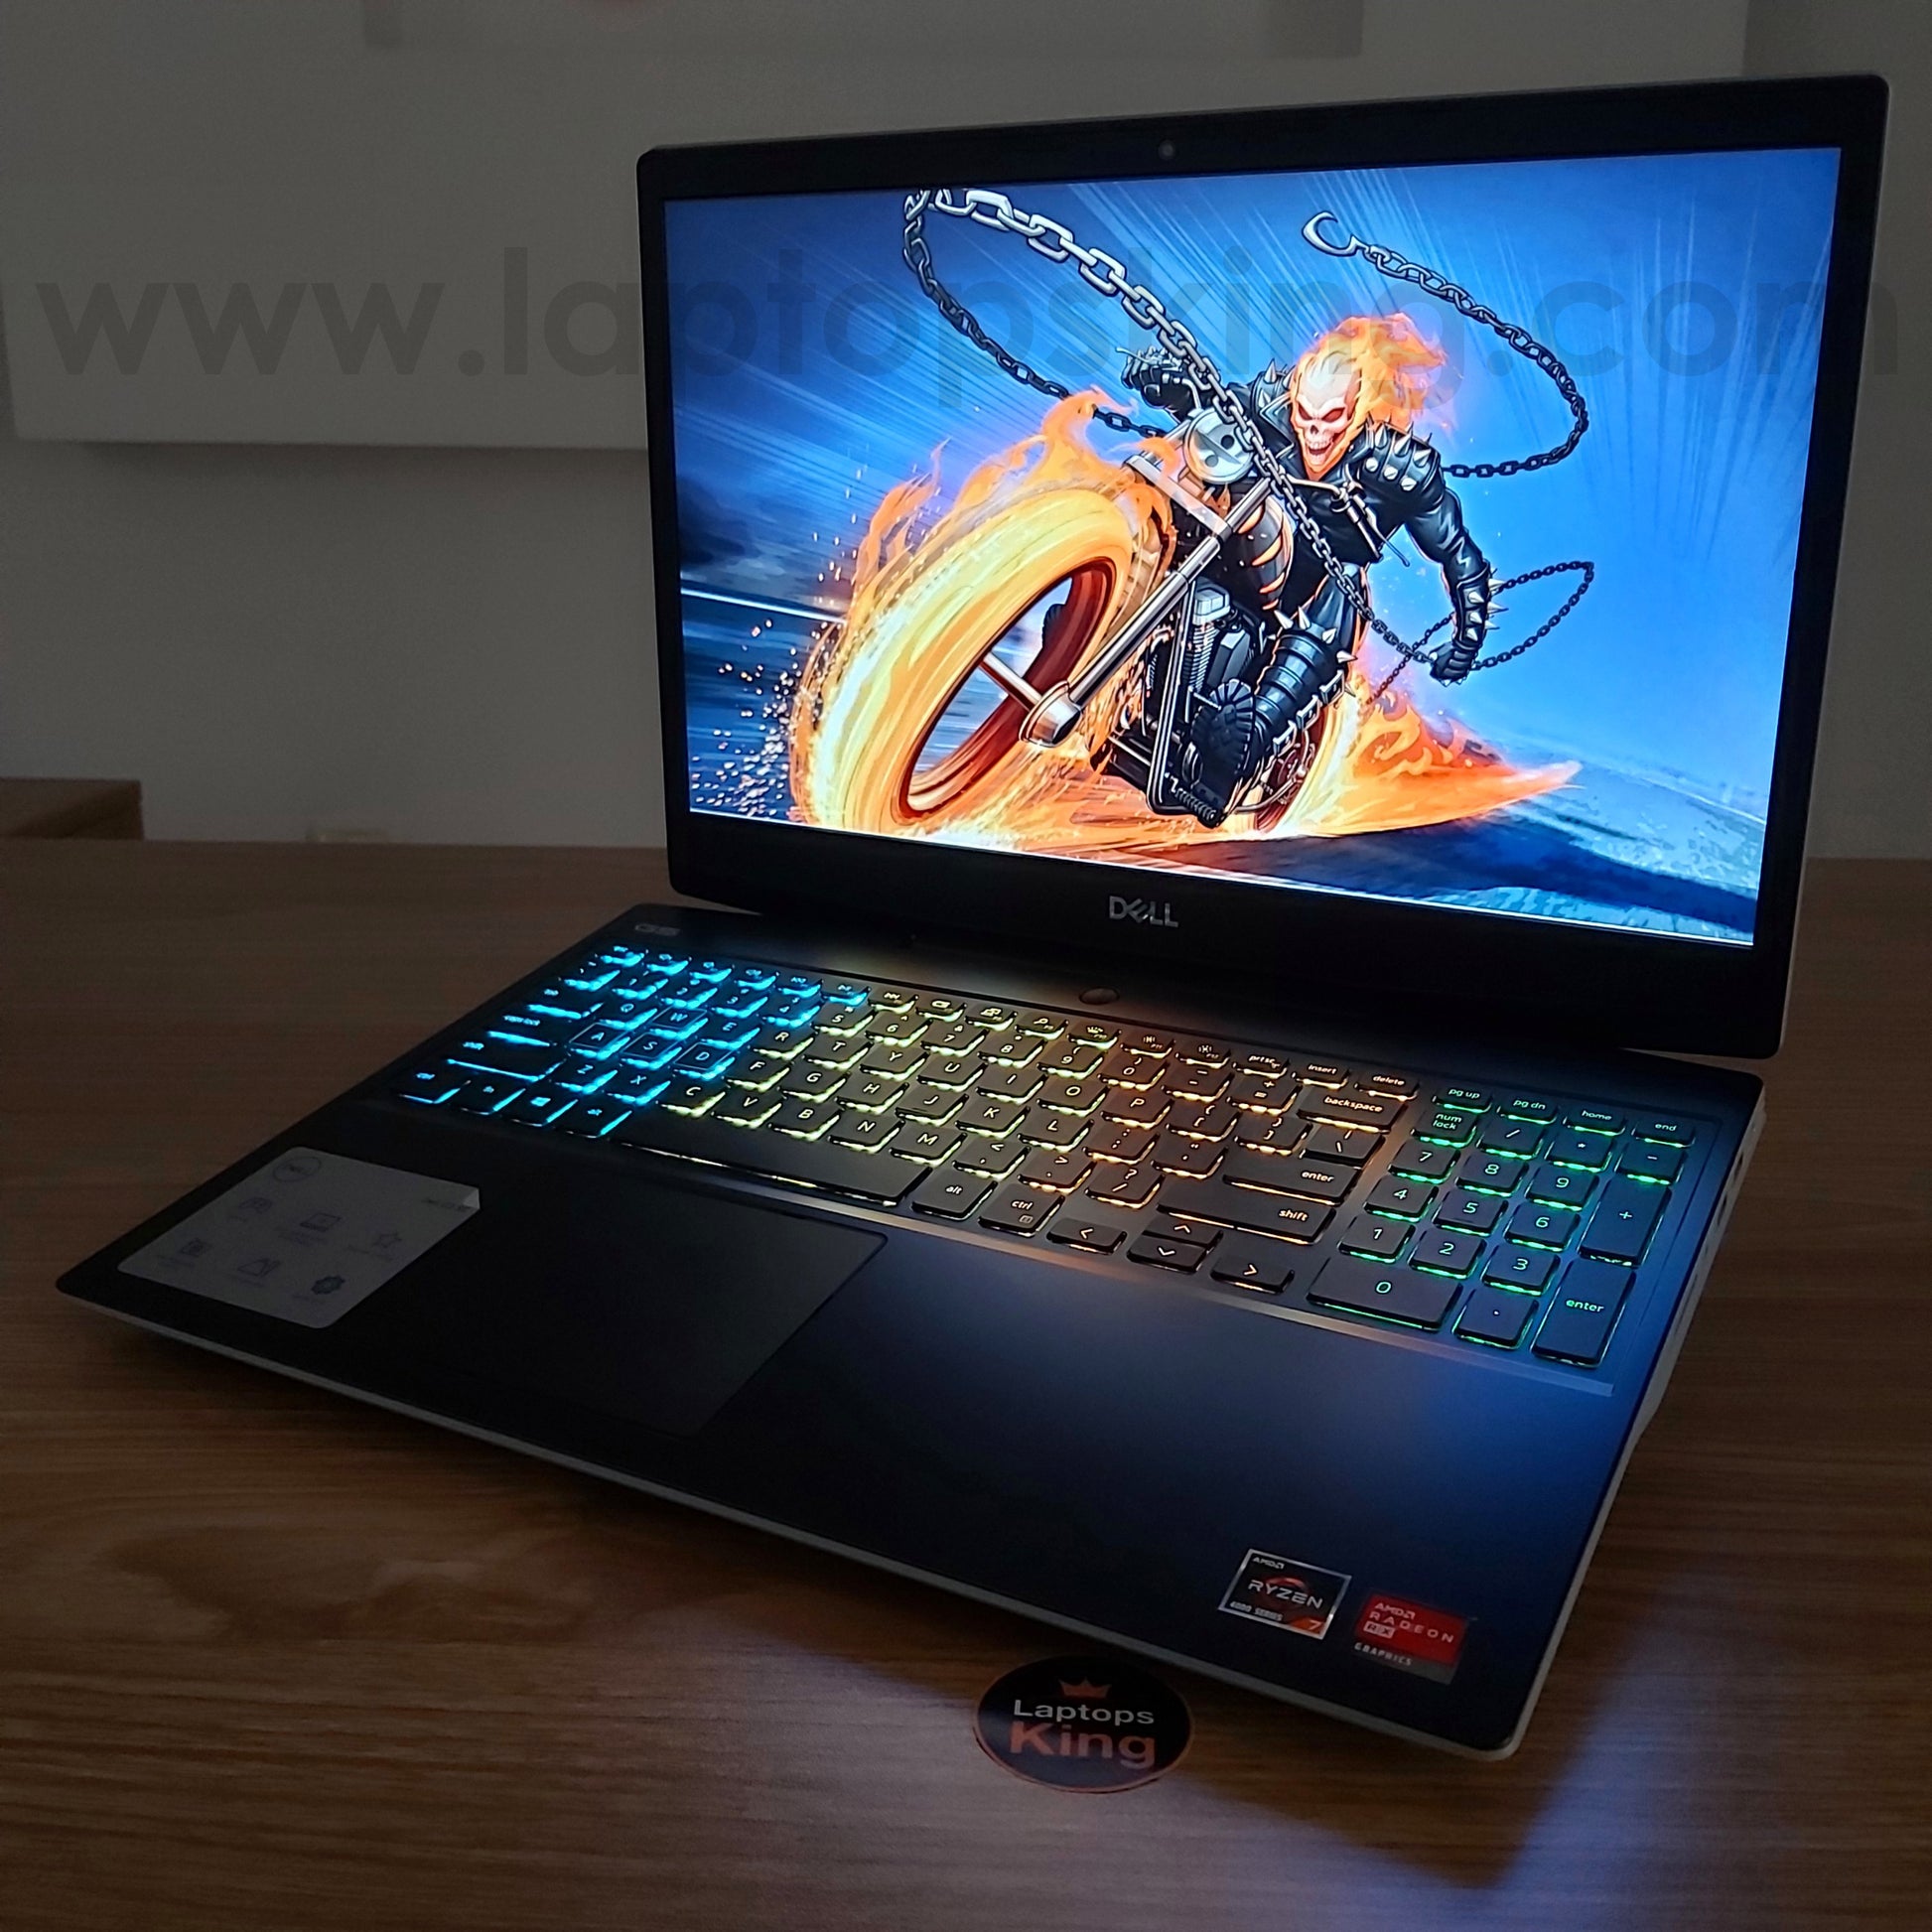 Dell G5 5505 Ryzen 7 4800h Rx 5600m 120hz Gaming Laptop Offers (Open Box) Gaming laptop, Graphic Design laptop, best laptop for gaming, best laptop for graphic design, computer for sale Lebanon, laptop for video editing in Lebanon, laptop for sale Lebanon, best graphic design laptop,	best video editing laptop, best programming laptop, laptop for sale in Lebanon, laptops for sale in Lebanon, laptop for sale in Lebanon, buy computer Lebanon, buy laptop Lebanon.